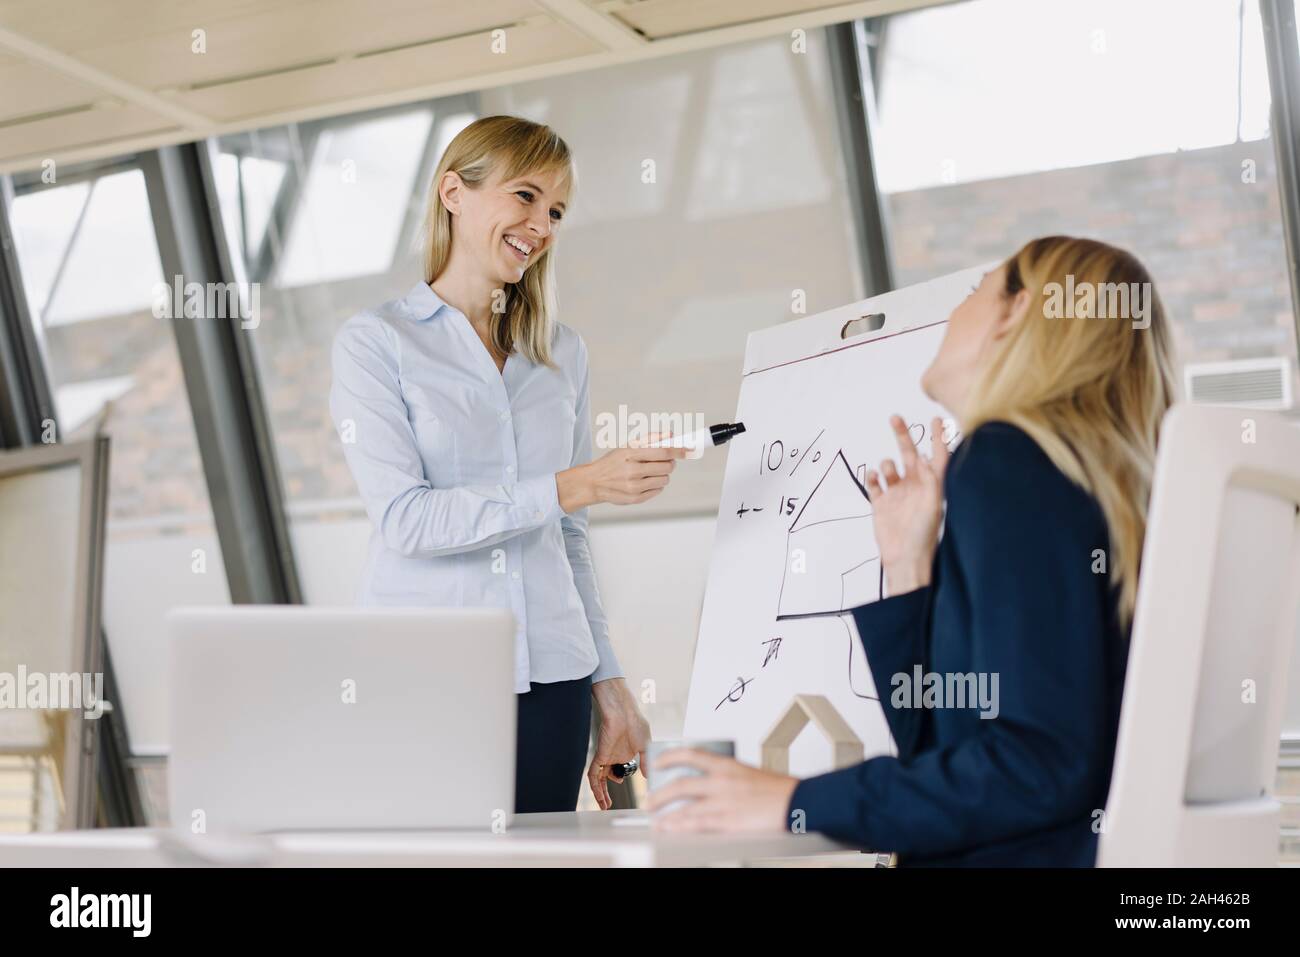 Two young businesswomen working with flip chart in office Stock Photo